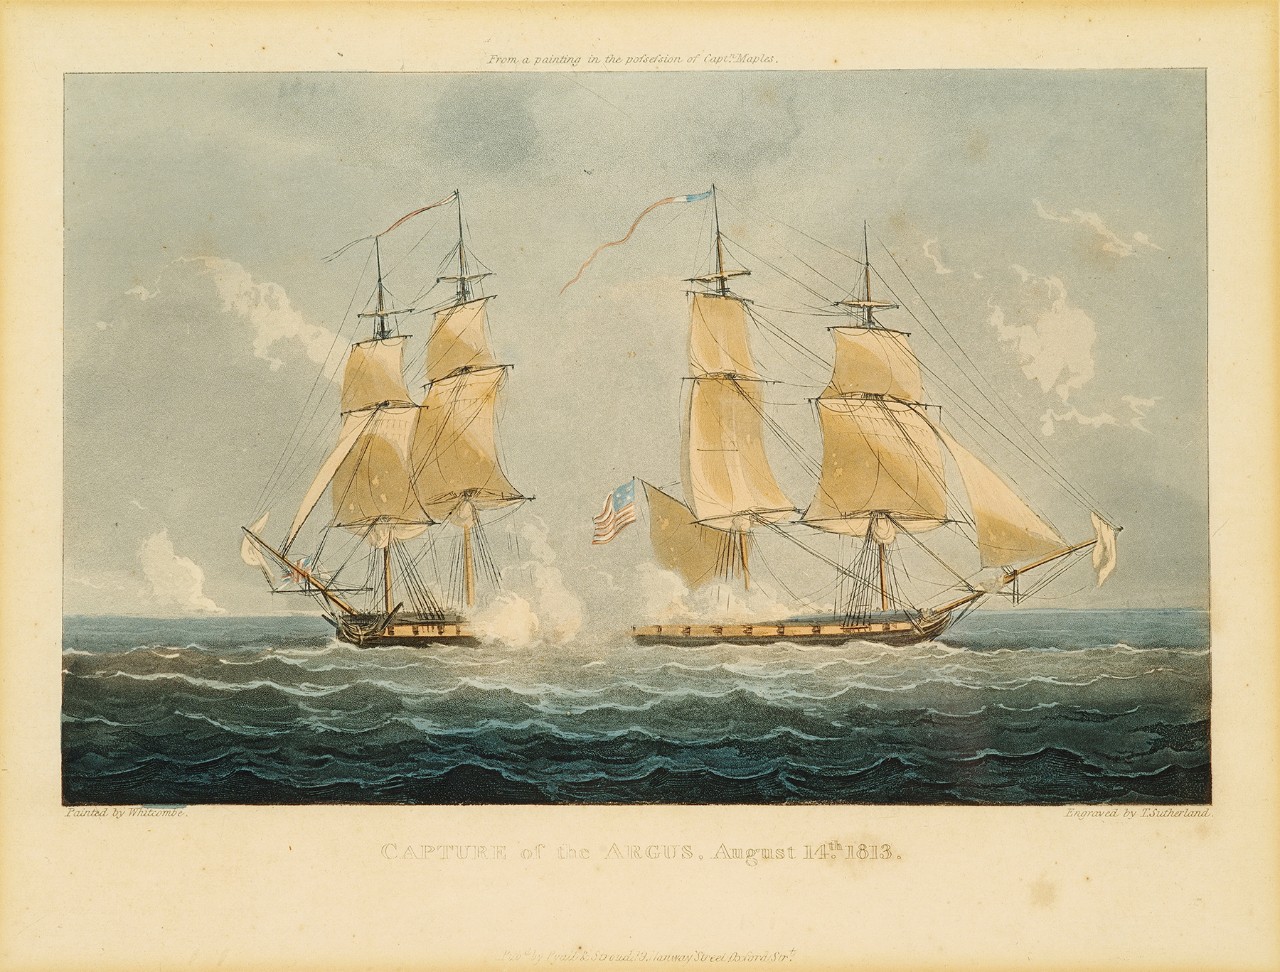 A British ship is firing into the stern of an American ship